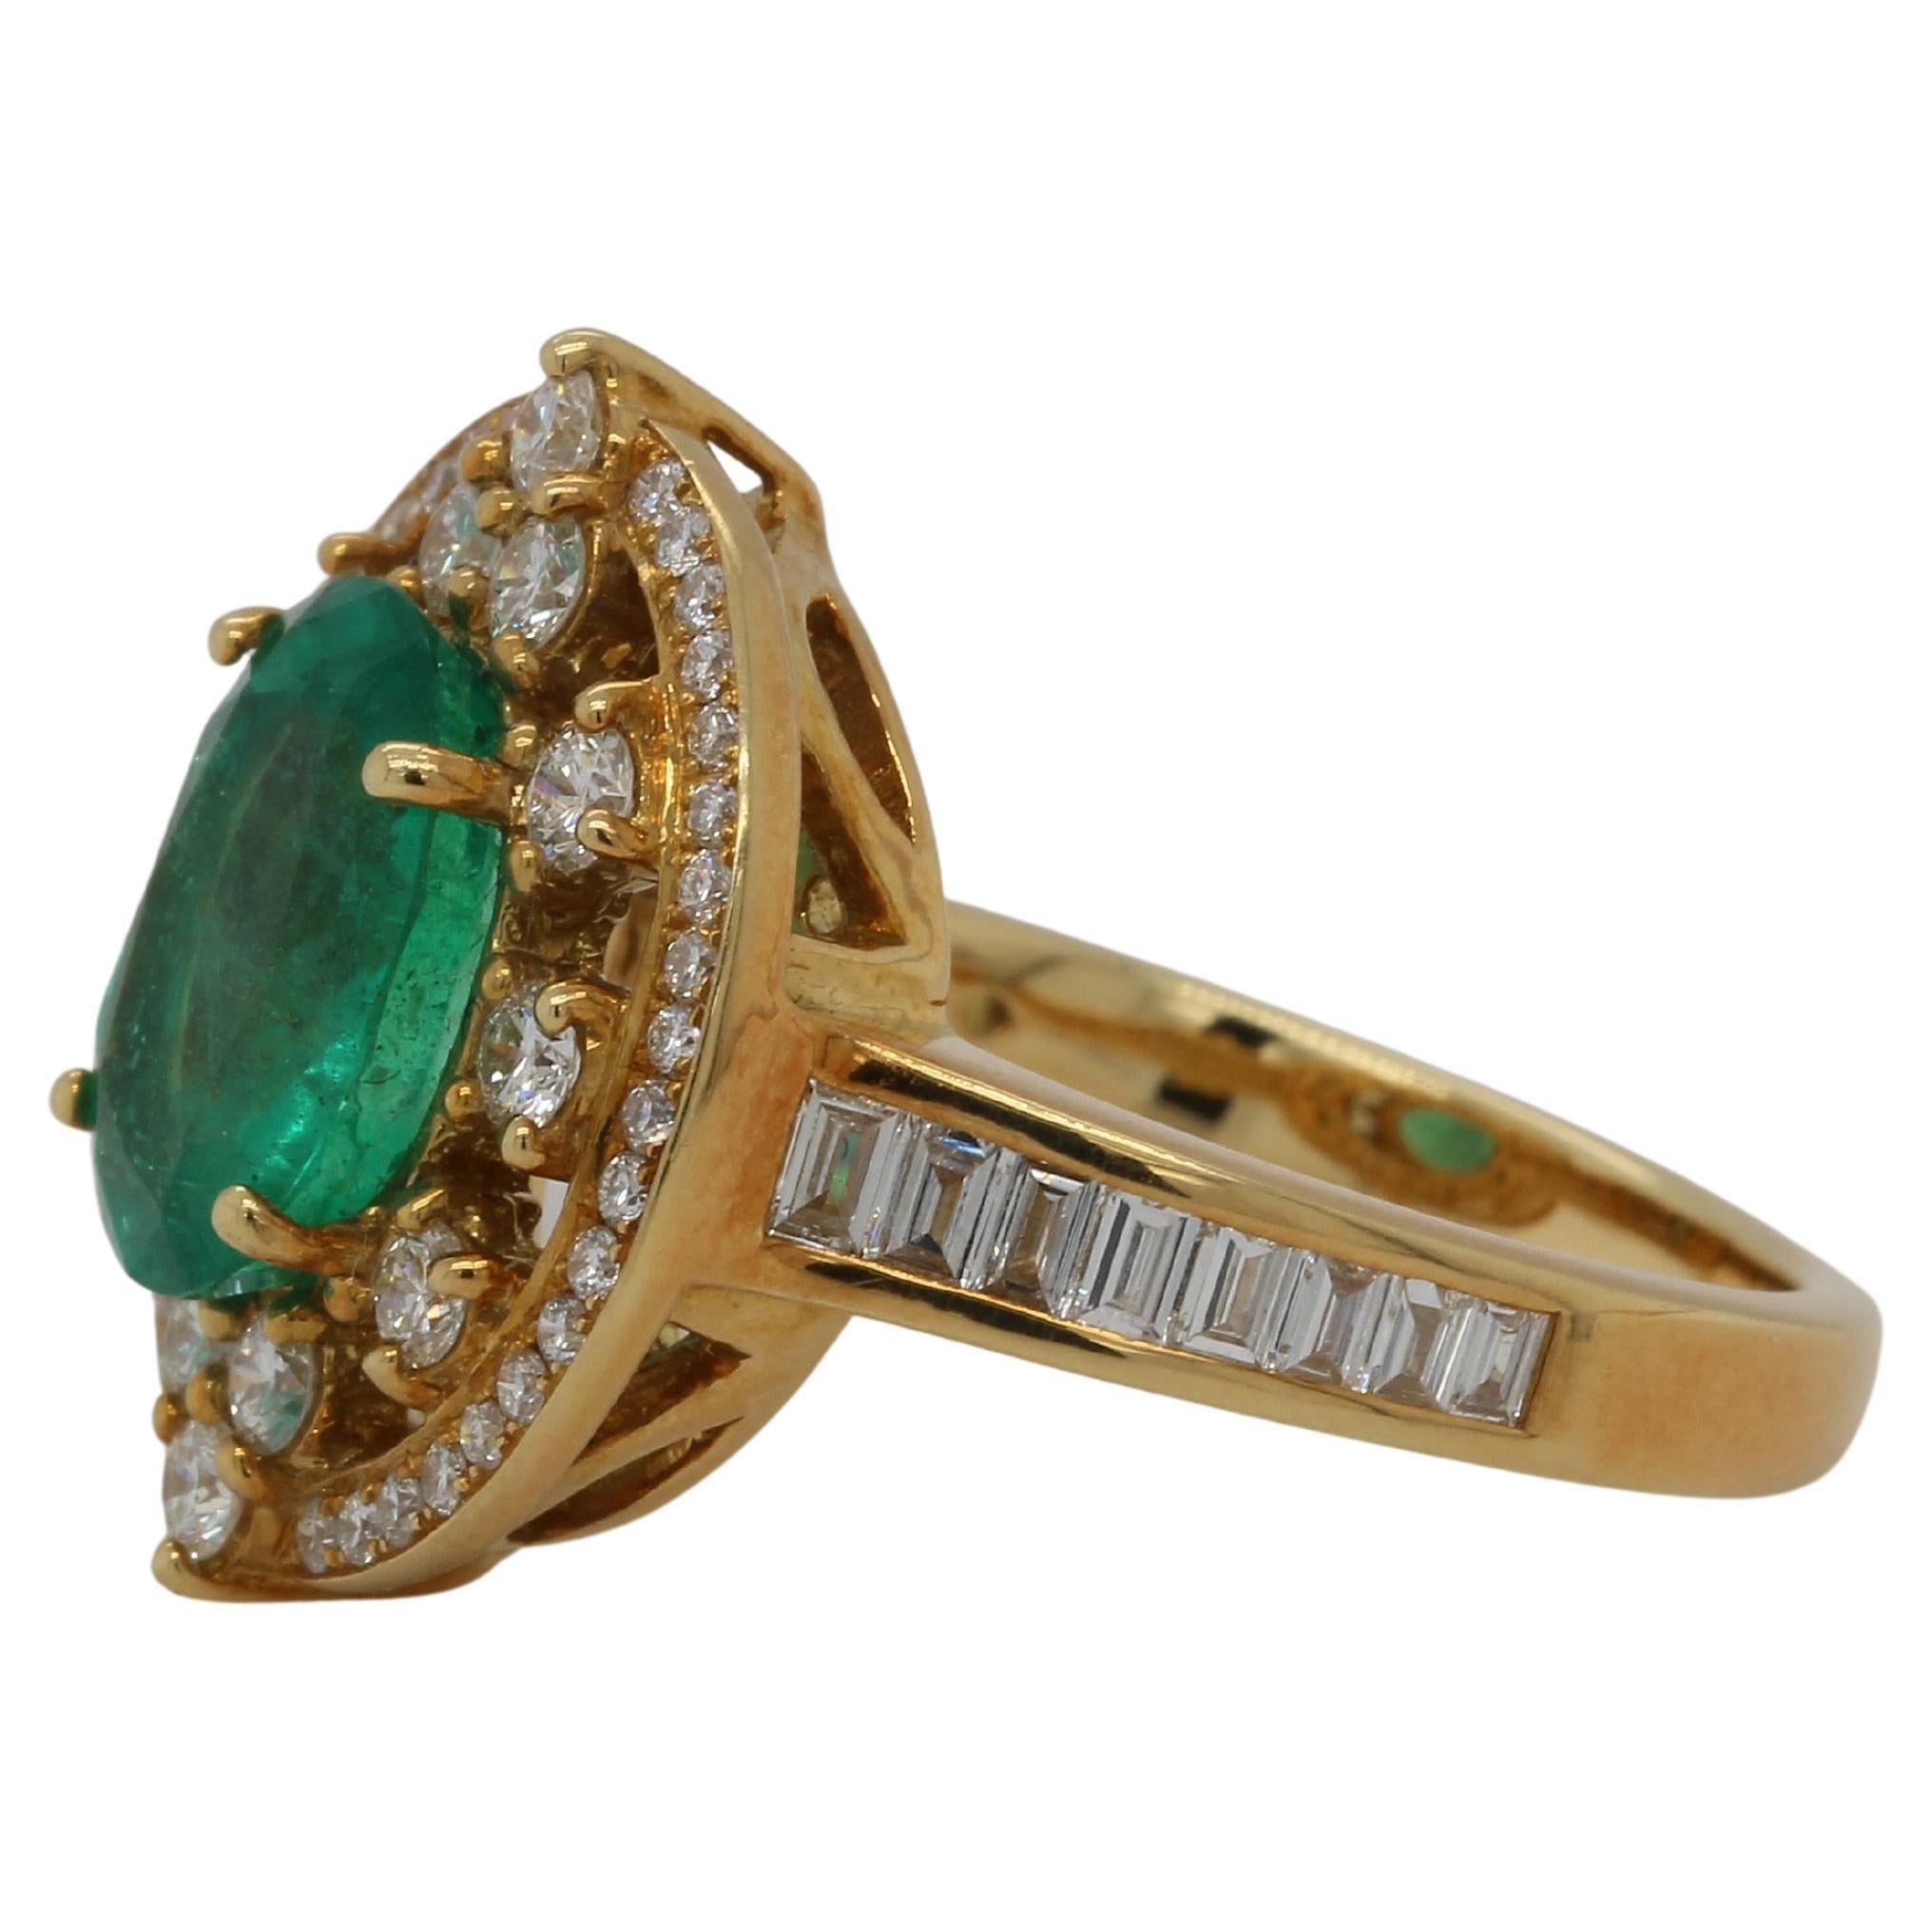 A brand new emerald and diamond 18K gold ring. A 2.29 carat emerald oval shape is set in this ring, which also includes a 0.34 carat diamond tapper and a 0.61 carat diamond round. This ring weighs 8.58 grams and is composed of 18K yellow